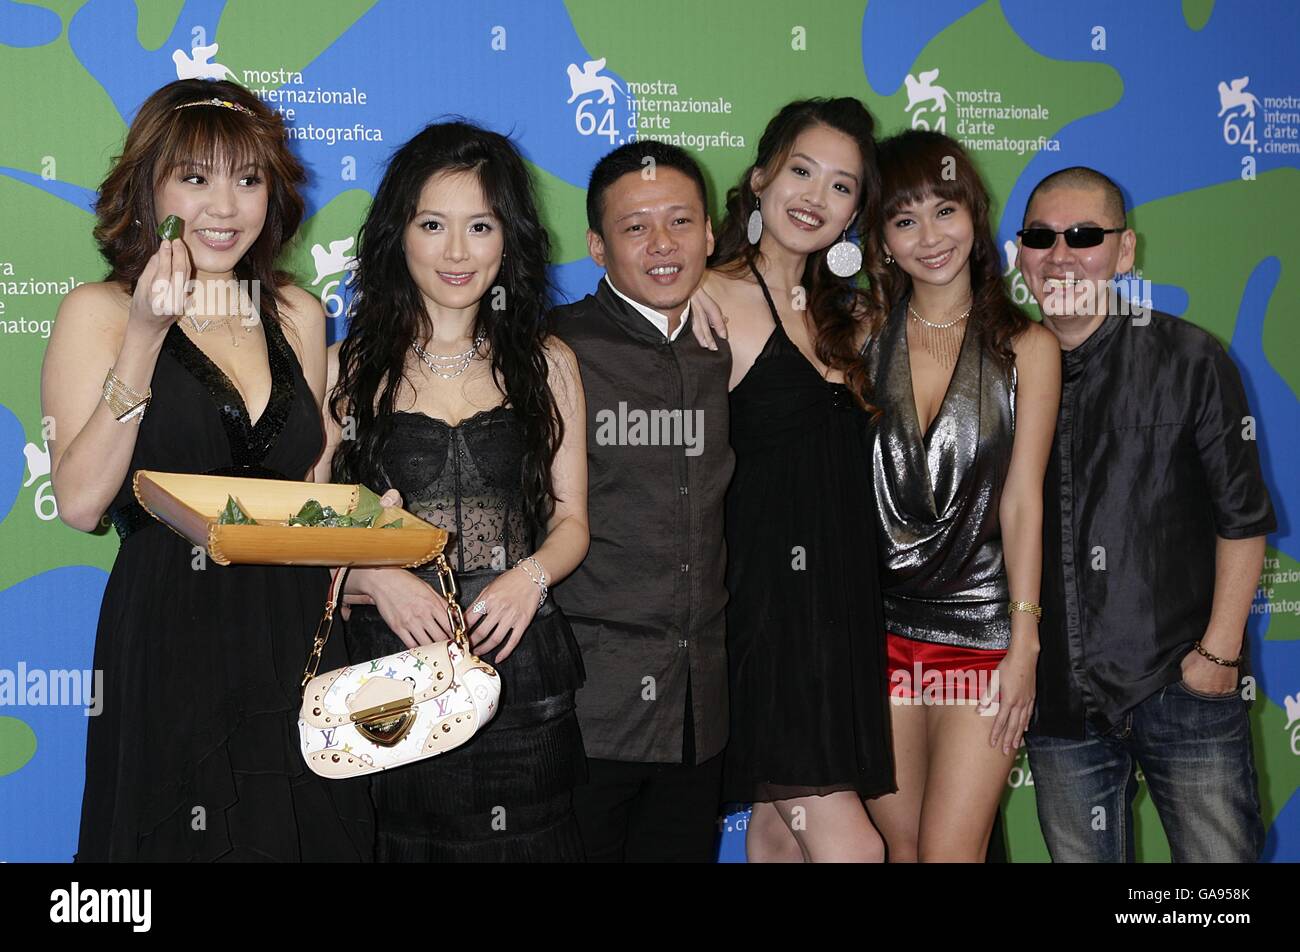 (left to right) Liu Jo Ting, Yin Shin, Lee Kang-sheng, Hsieh I Chen, Chou Chun Yen and Tsai Ming-liang during a photocall for the film Help Me Eros, at the Venice Film Festival in Italy Stock Photo